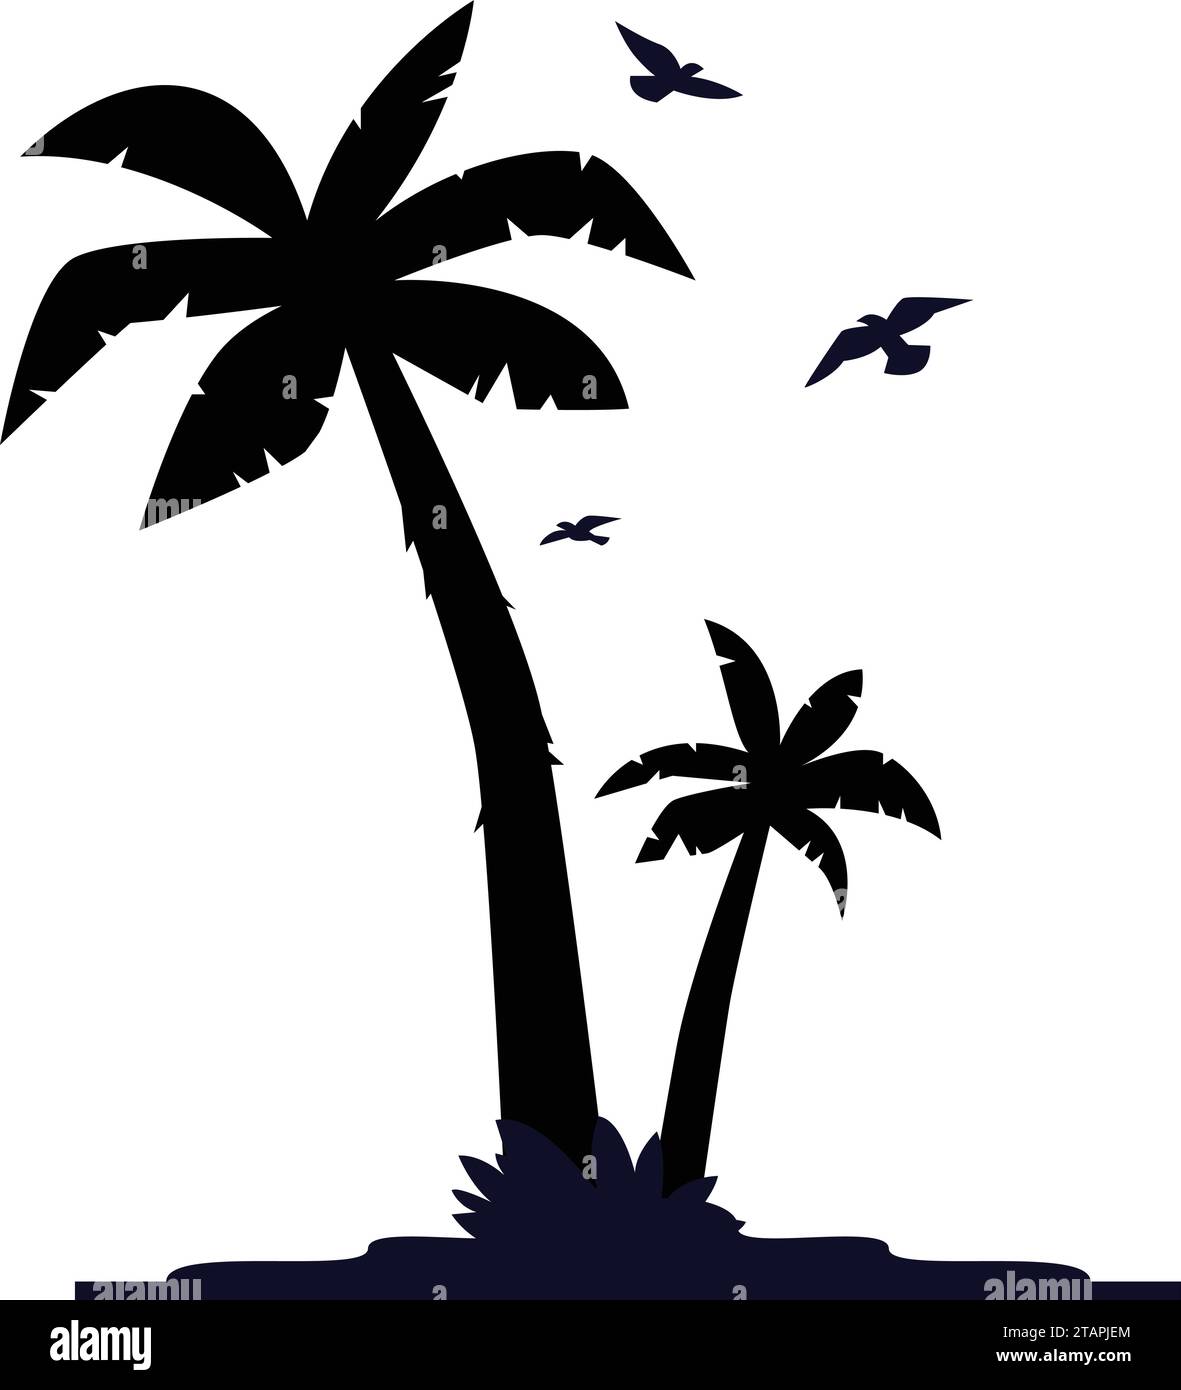 Black palm trees set isolated on white background. Palm silhouettes. Stock Vector